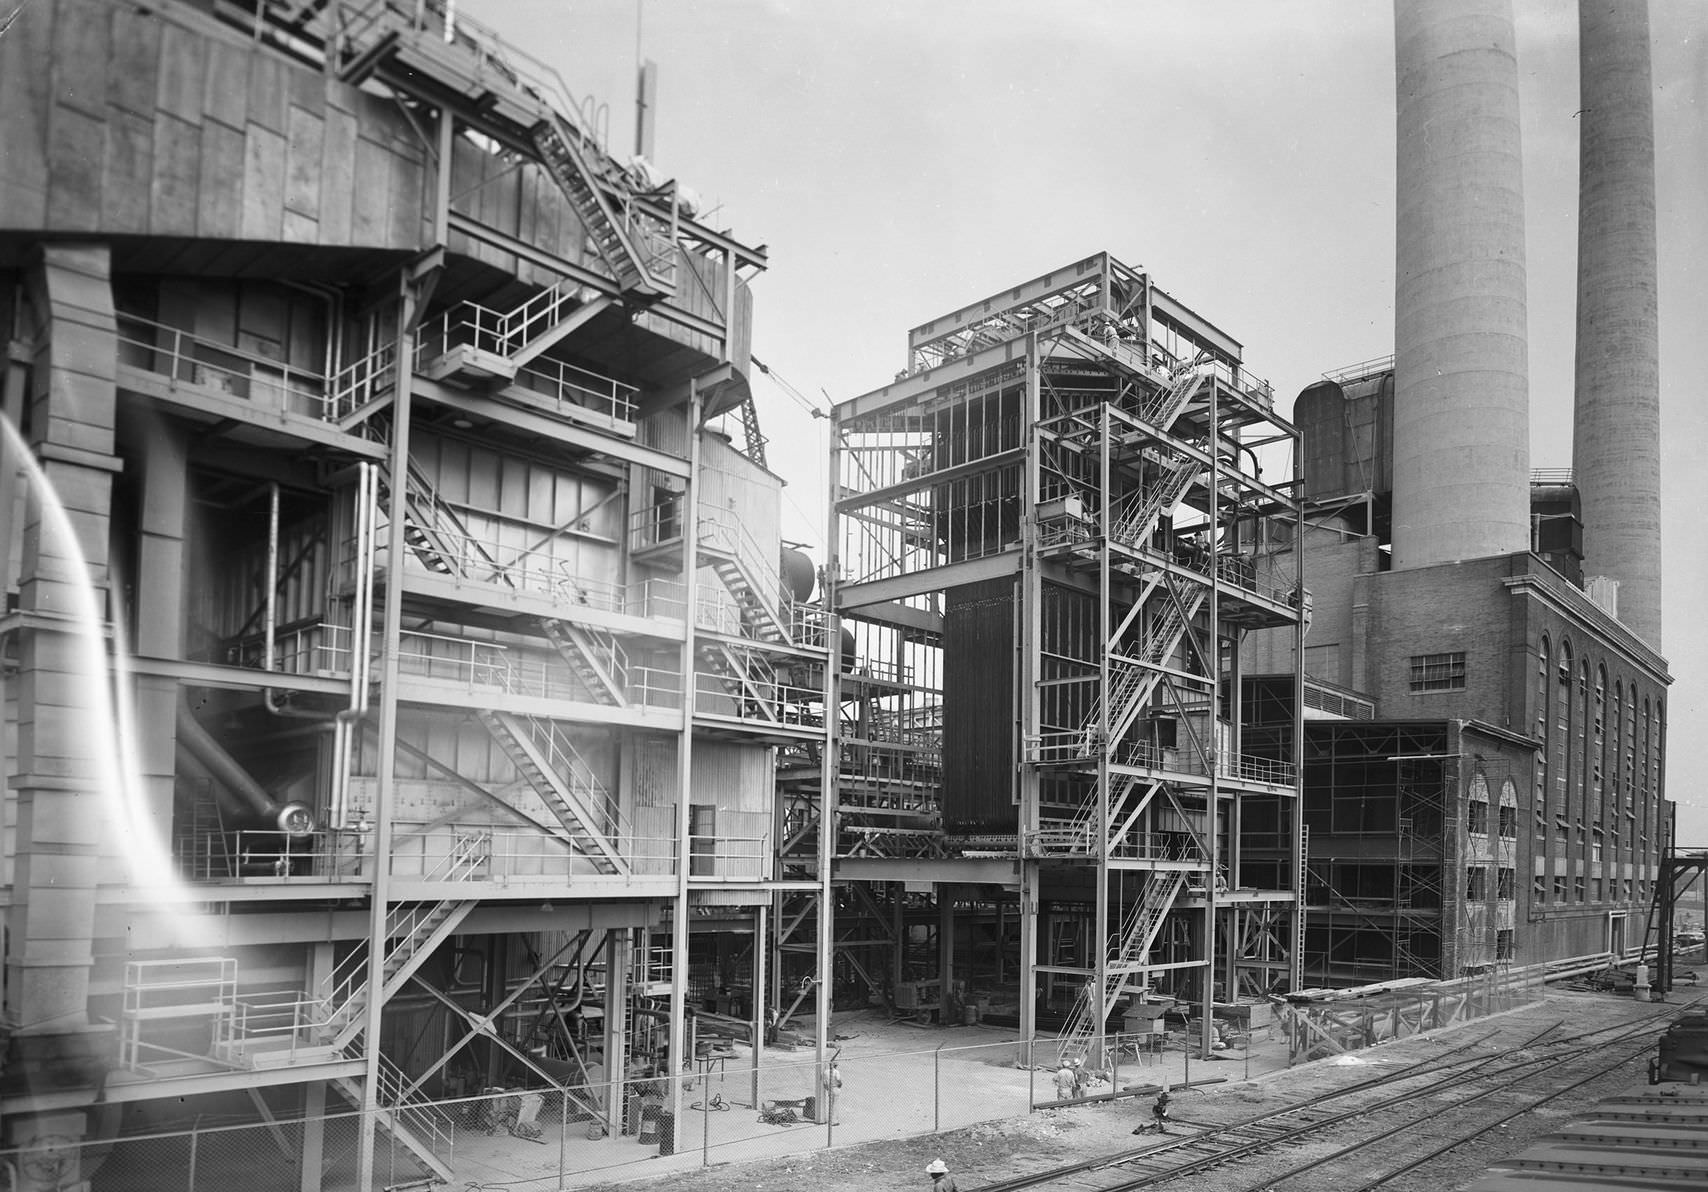 Power plant, downtown Dallas, Texas, 1953. The picture shows a view from outside the power plant in downtown Dallas. There is a railroad next to the plant.